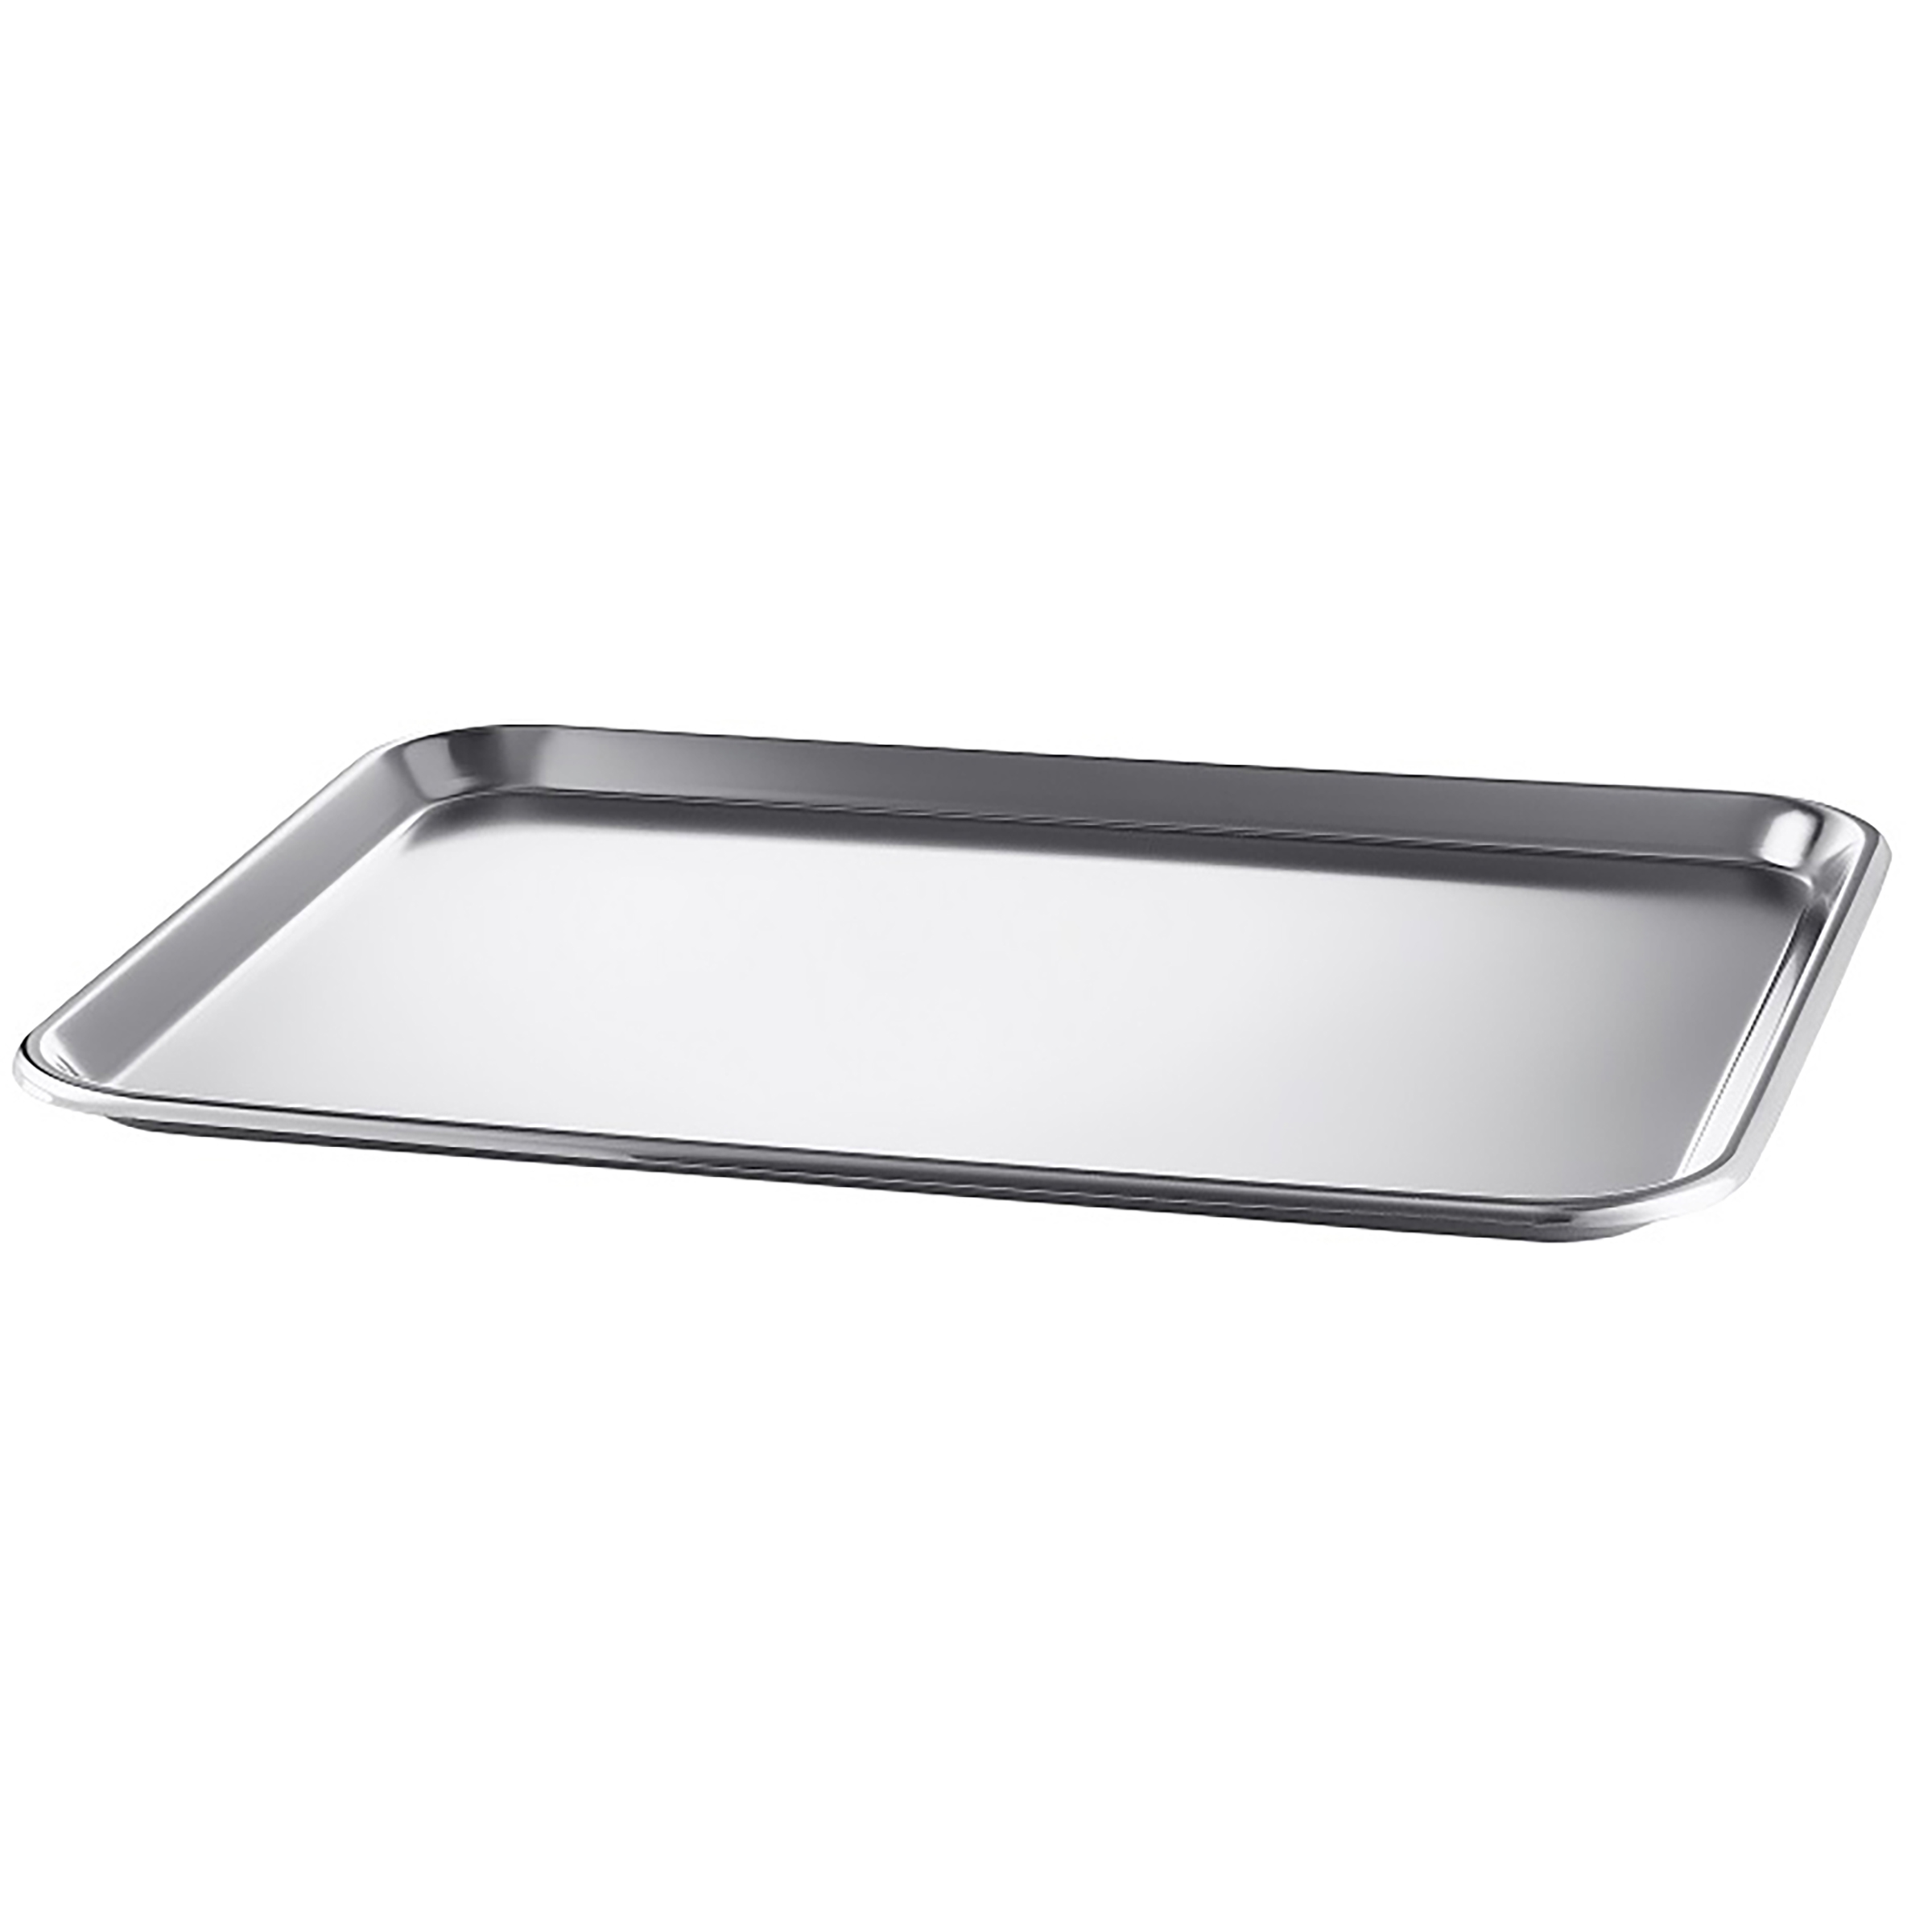 Flat 304 stainless steel tray - dimensions 432 x 295 x 19 mm 